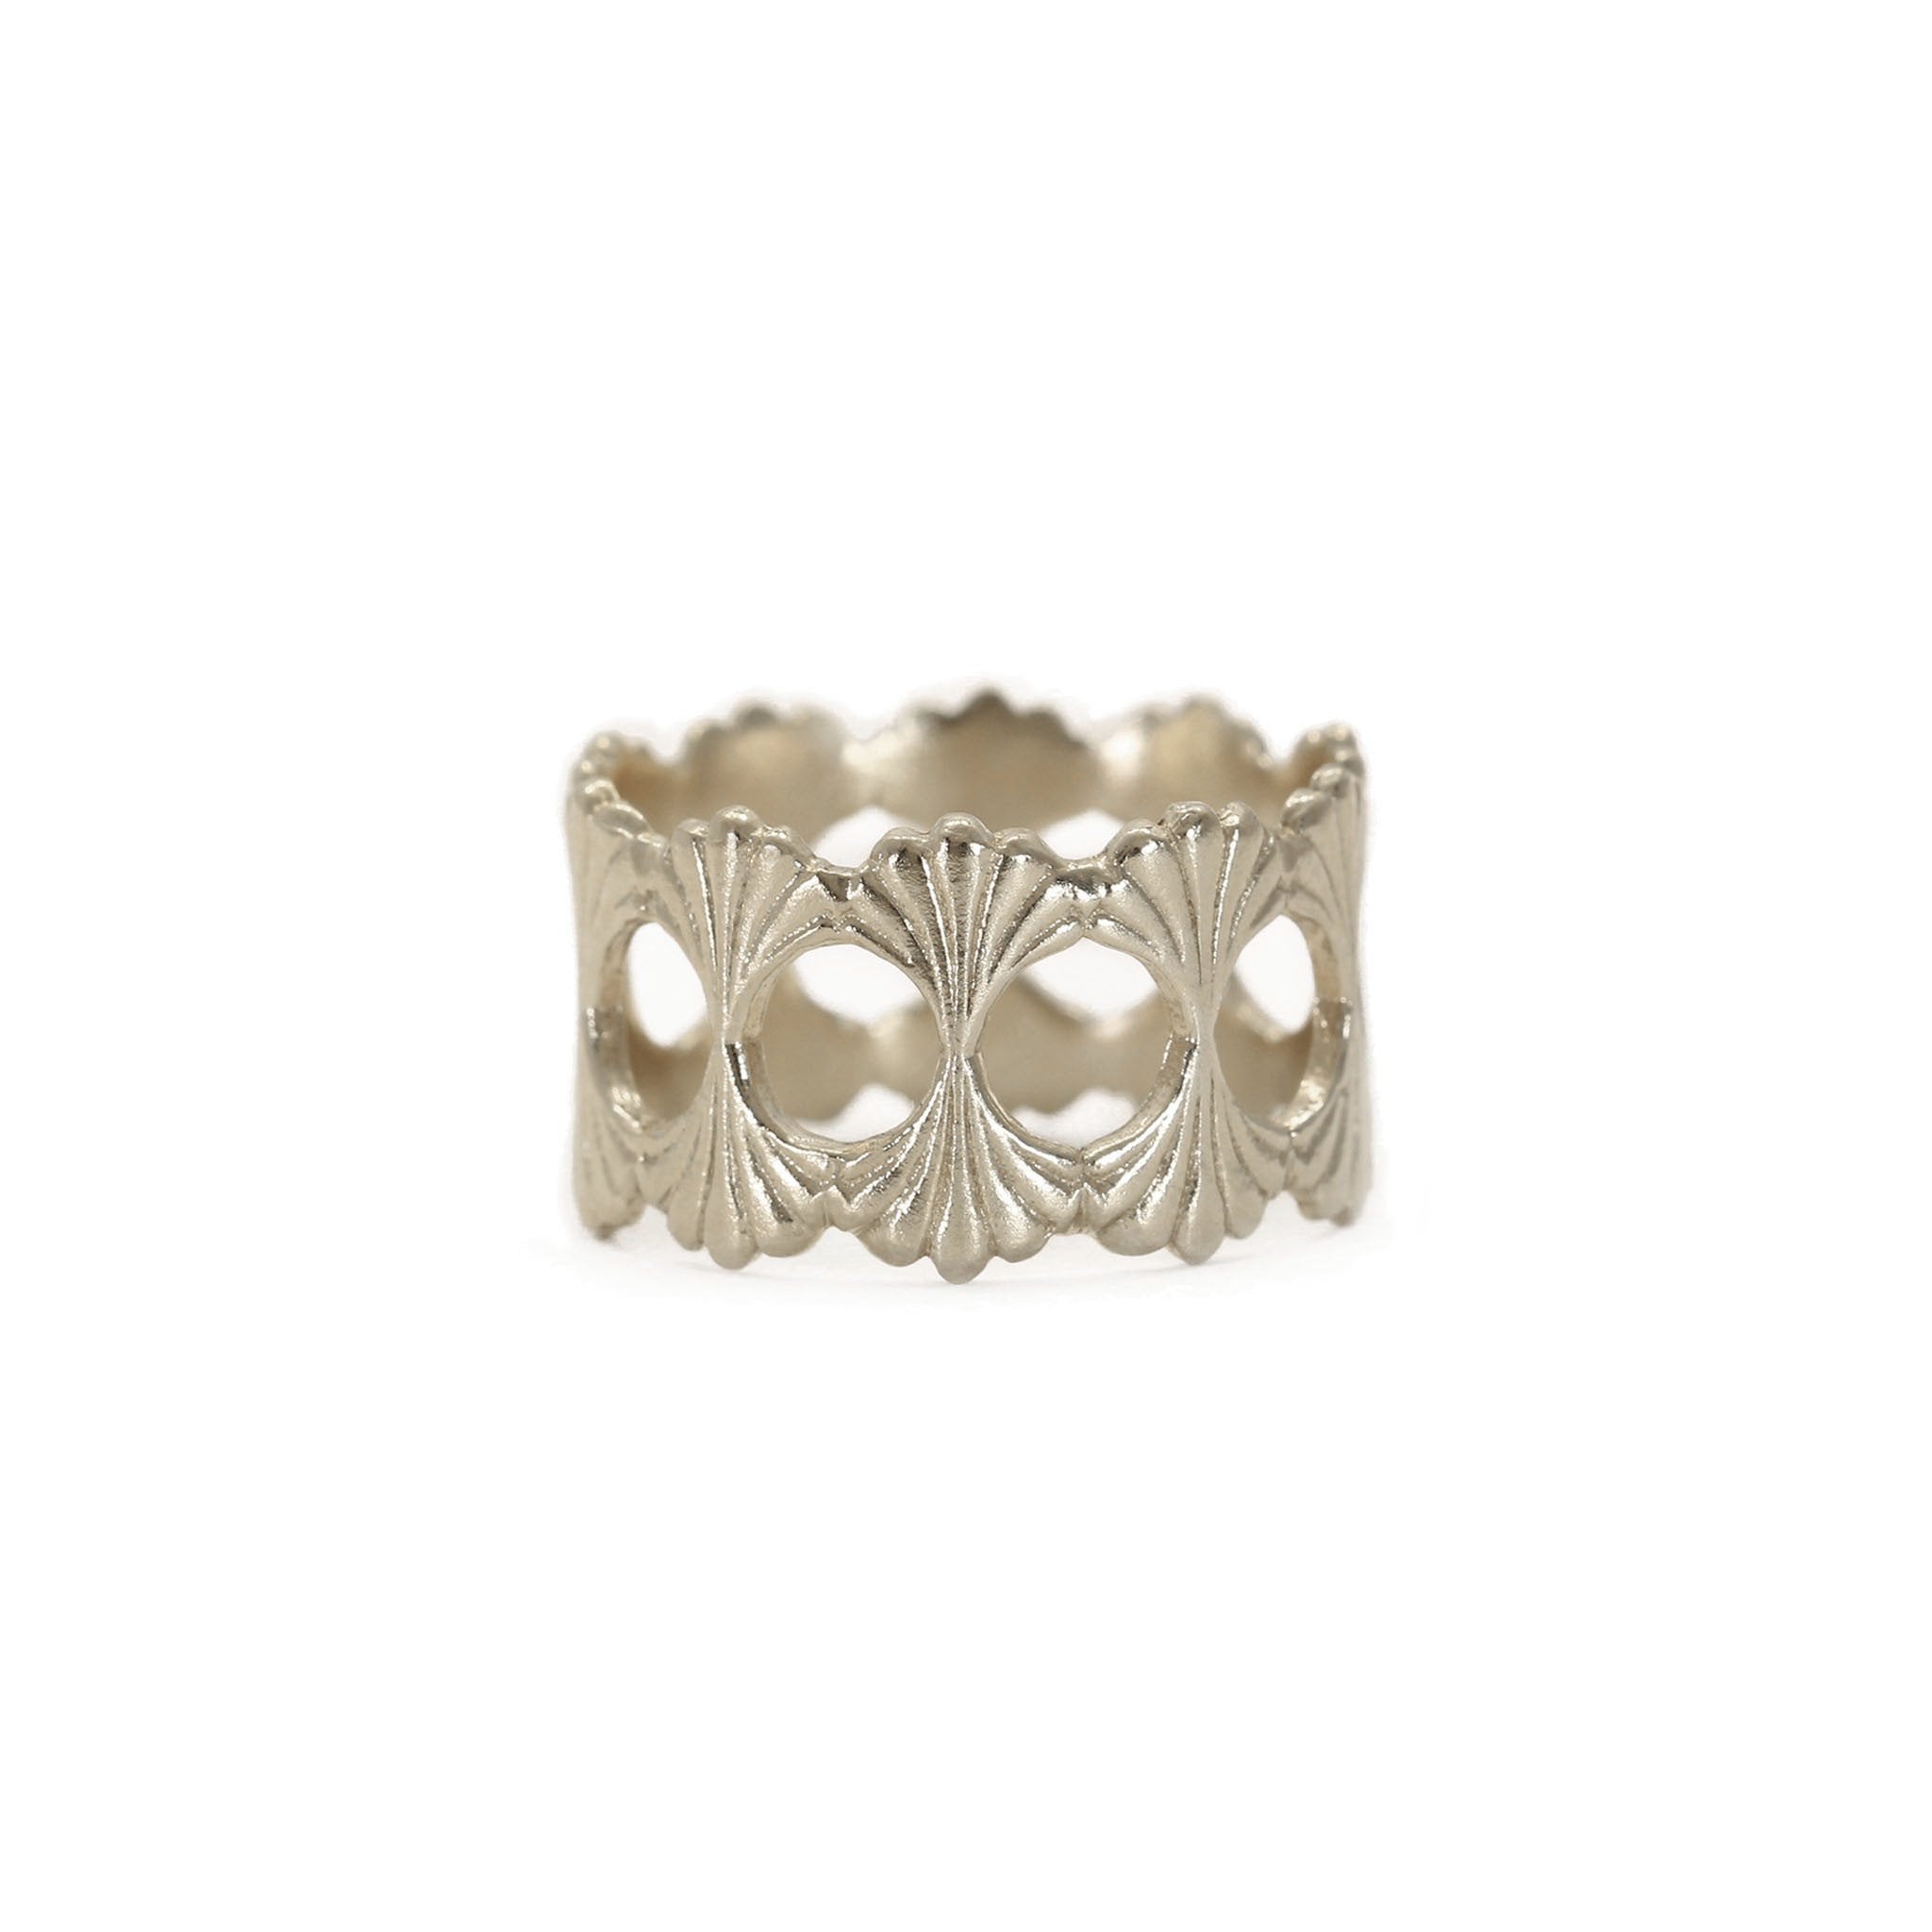 Temple Filigree Ring in sterling silver